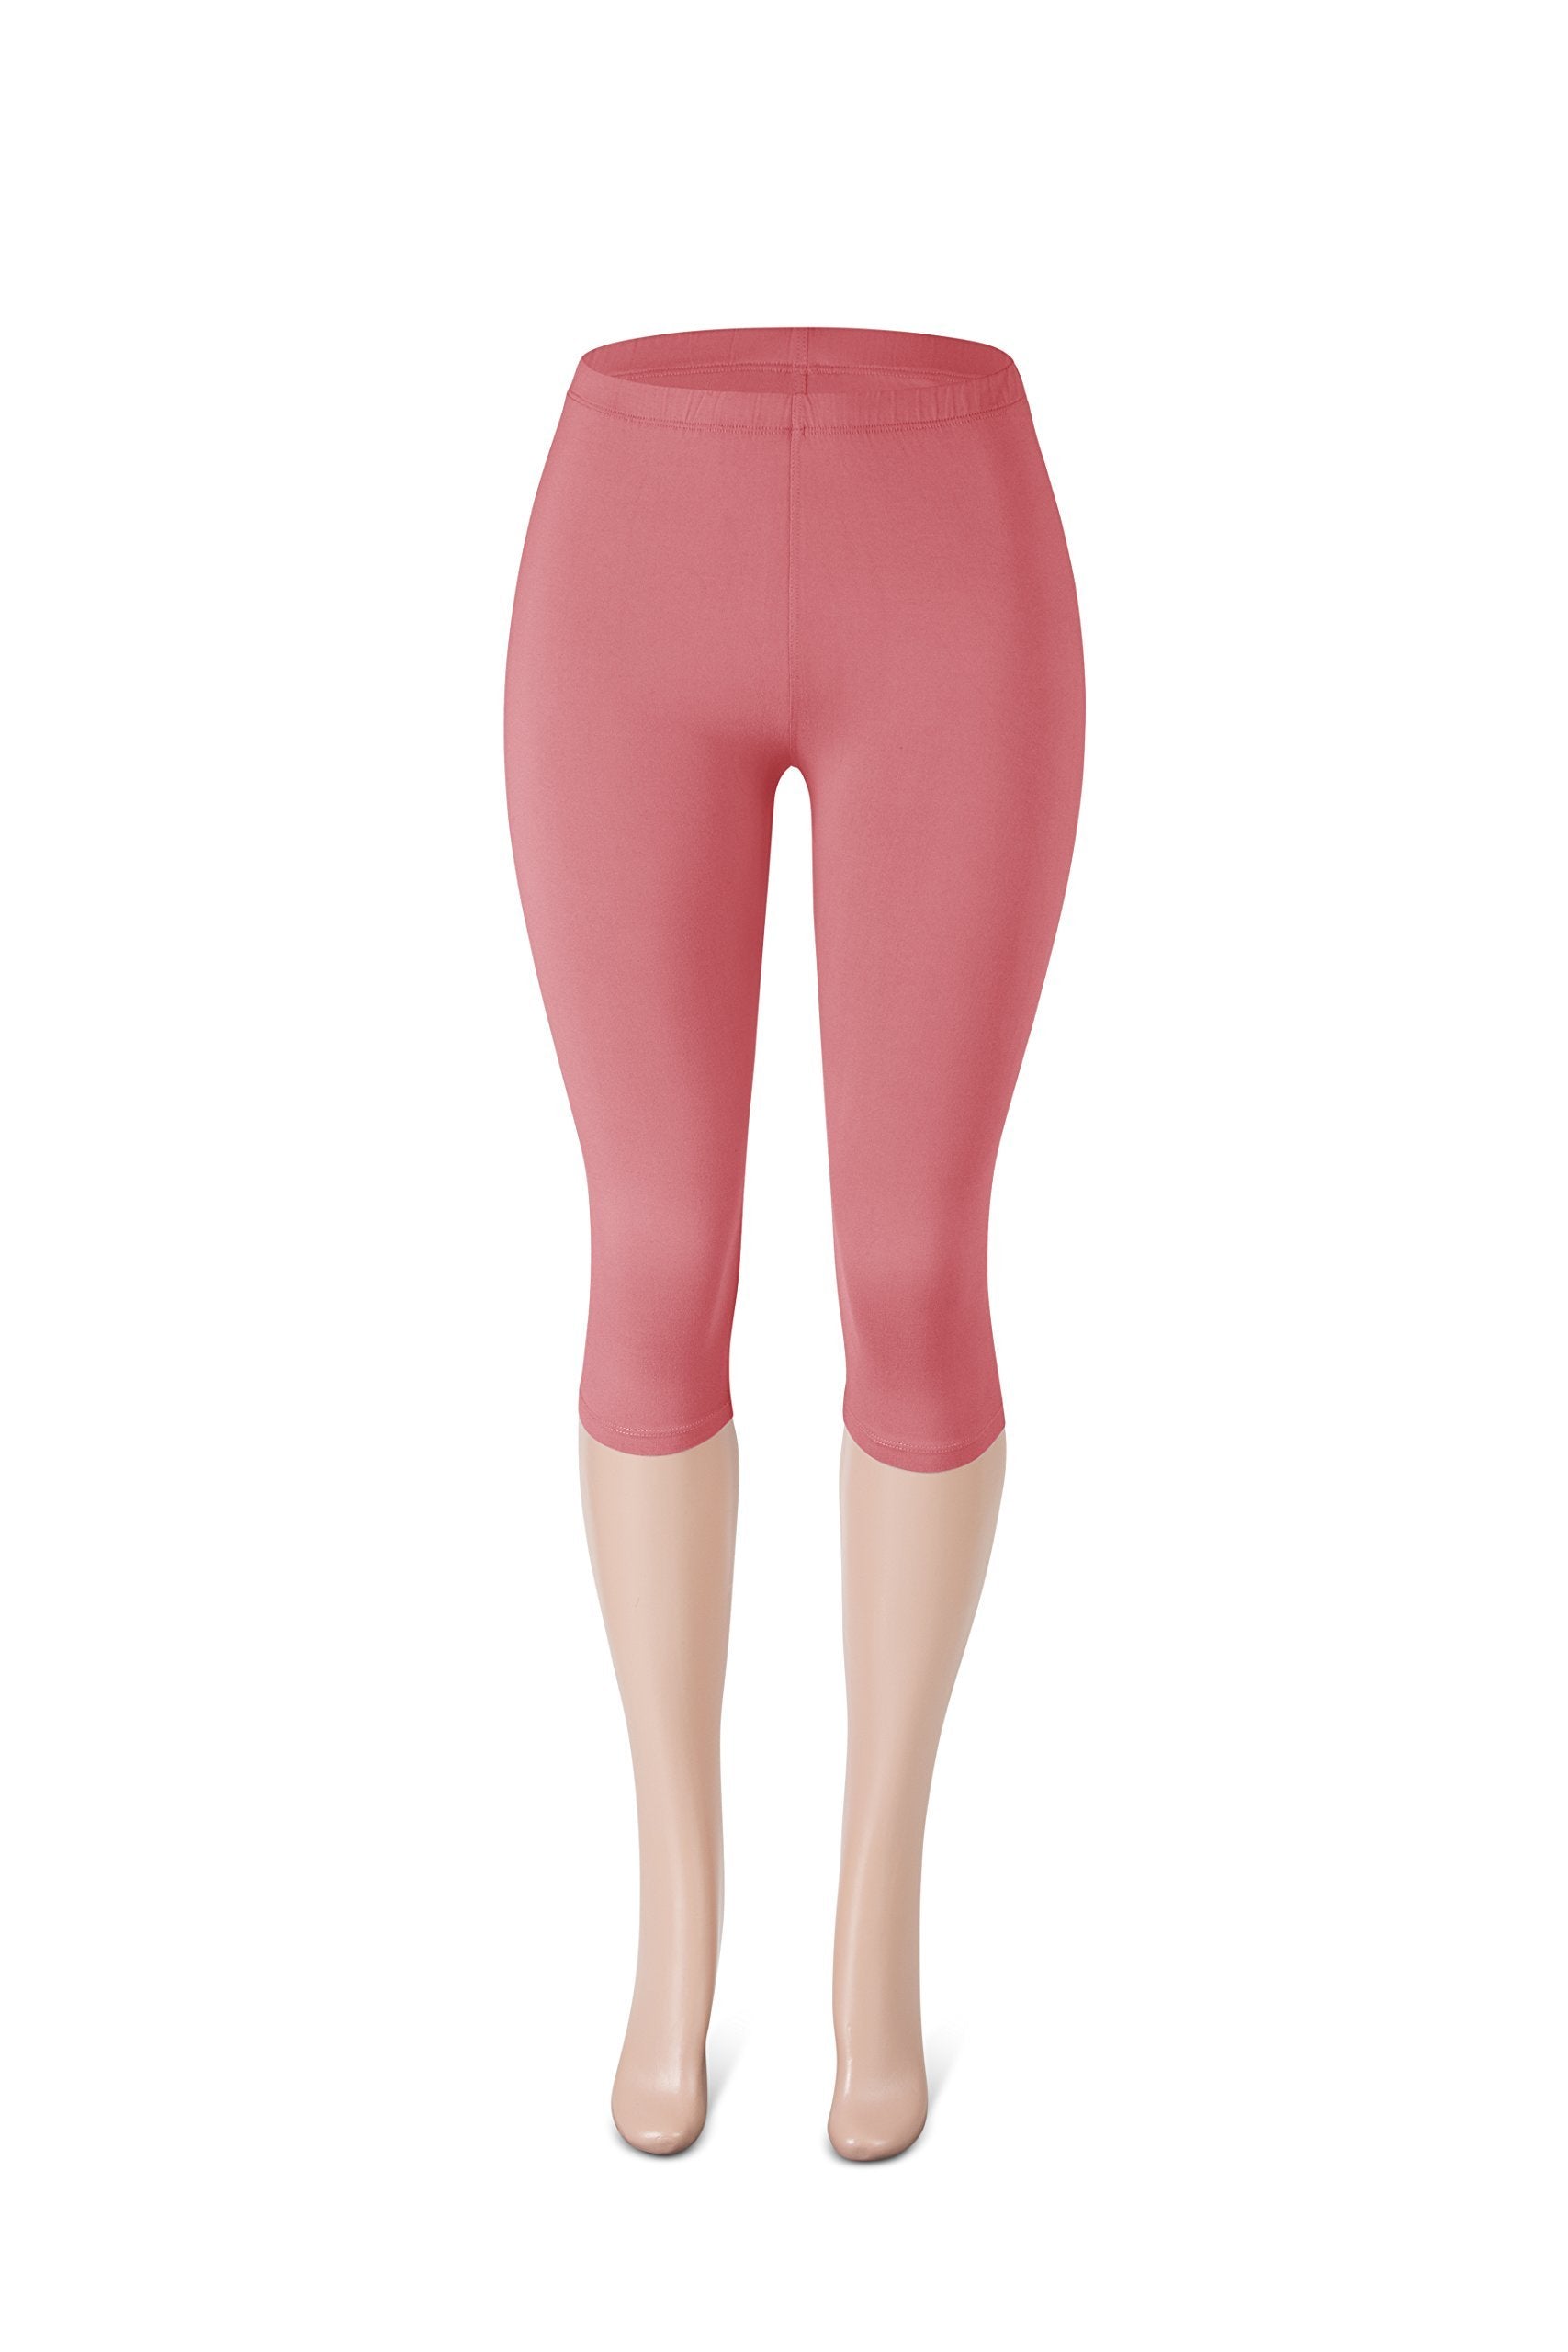 SATINA High Waisted Leggings for Women | Full Length | 1 Inch Waistband (Plus Size, Neon Coral)